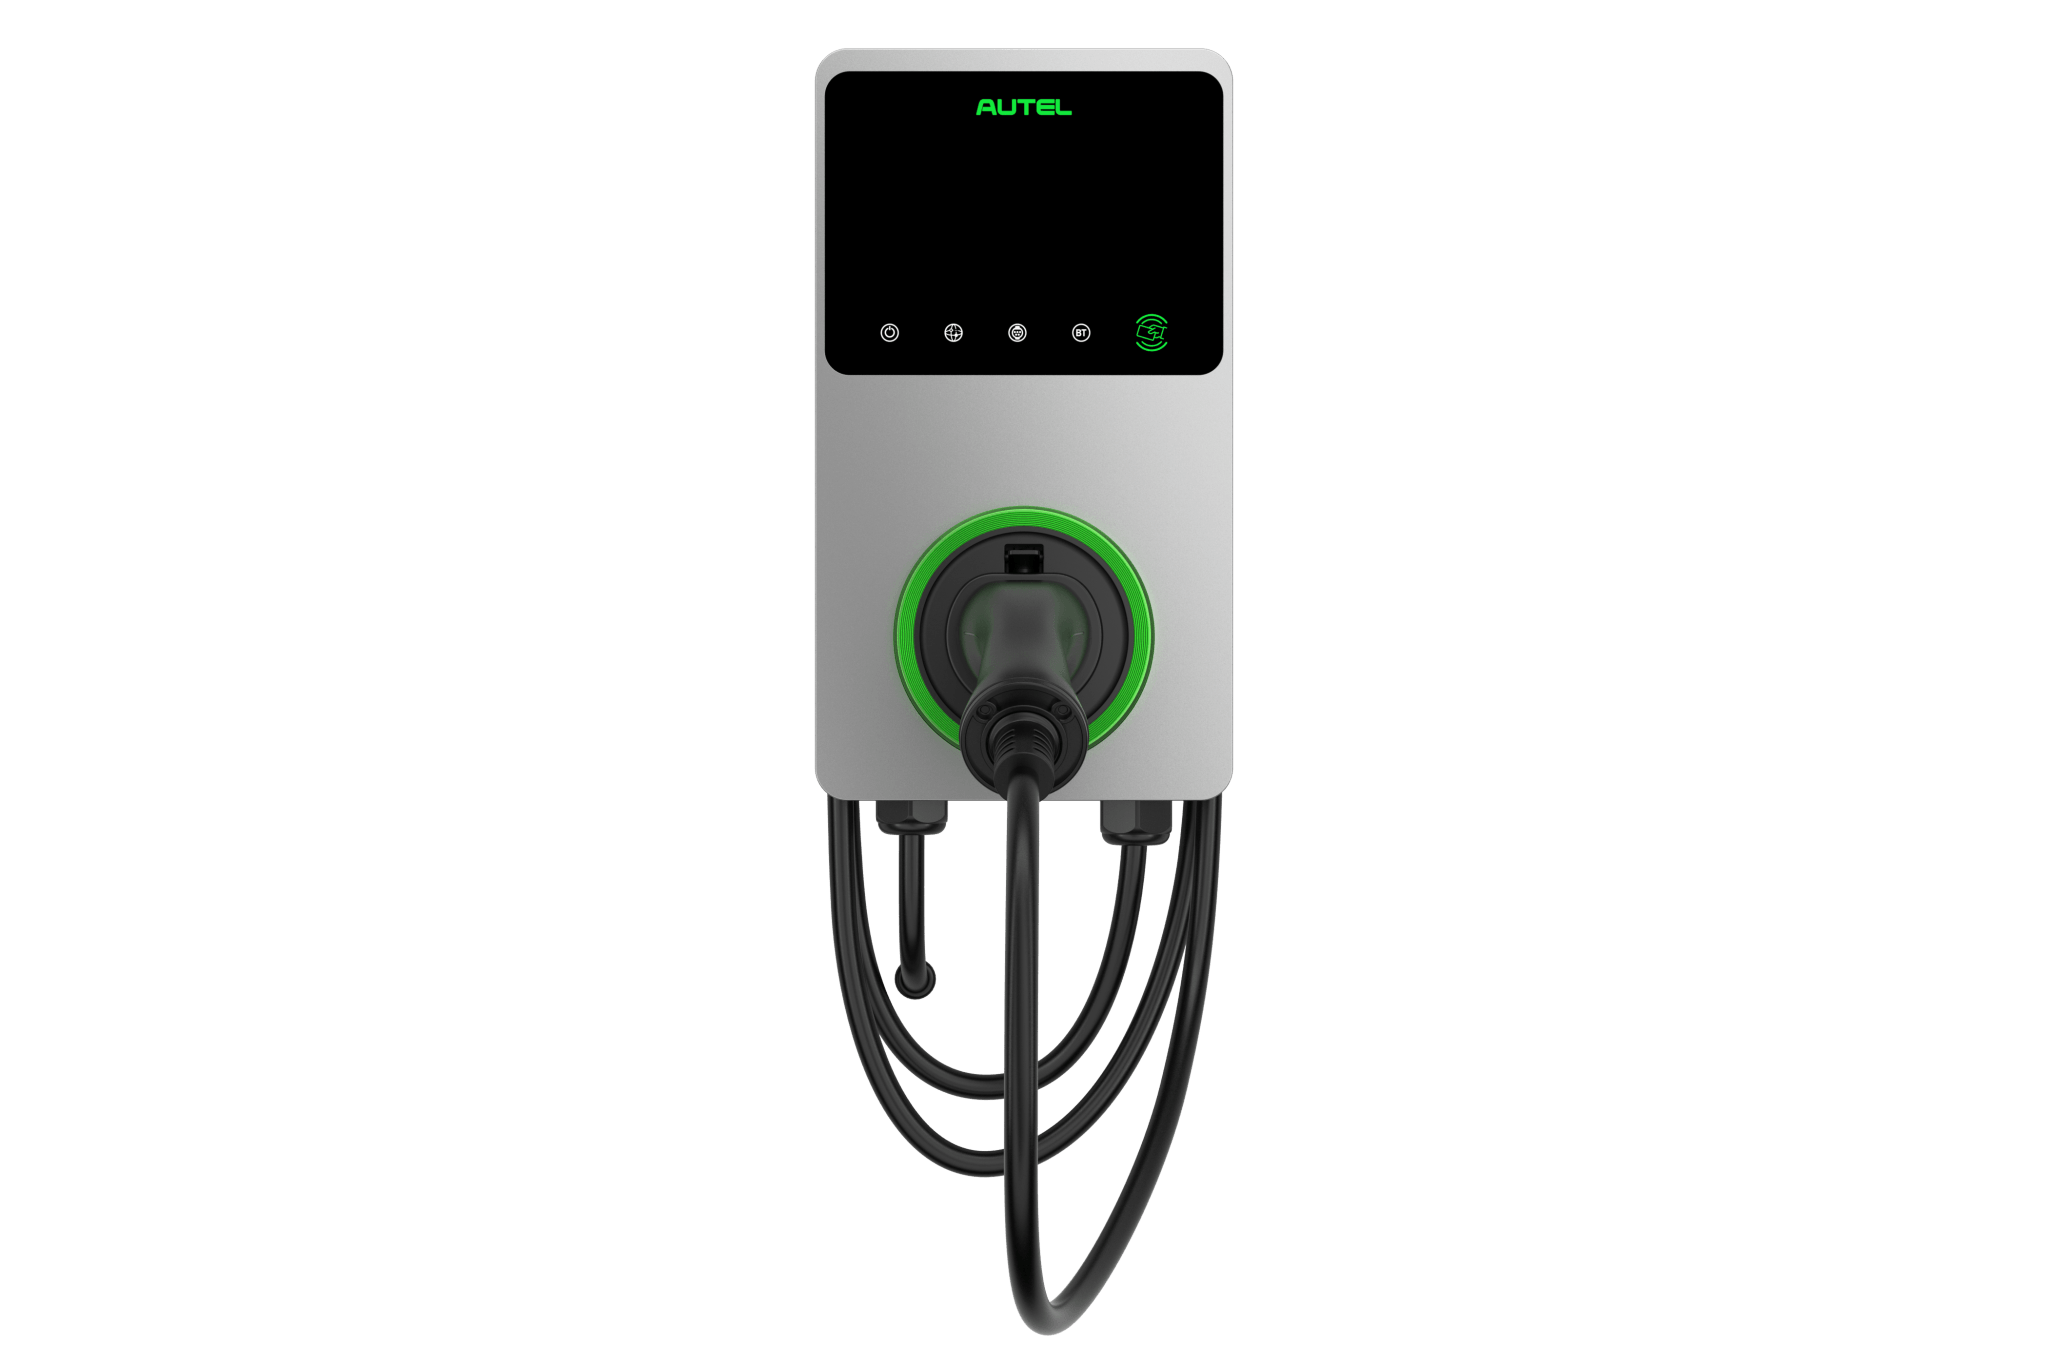 MaxiCharger AC Silber - Evcharger Autel Europe